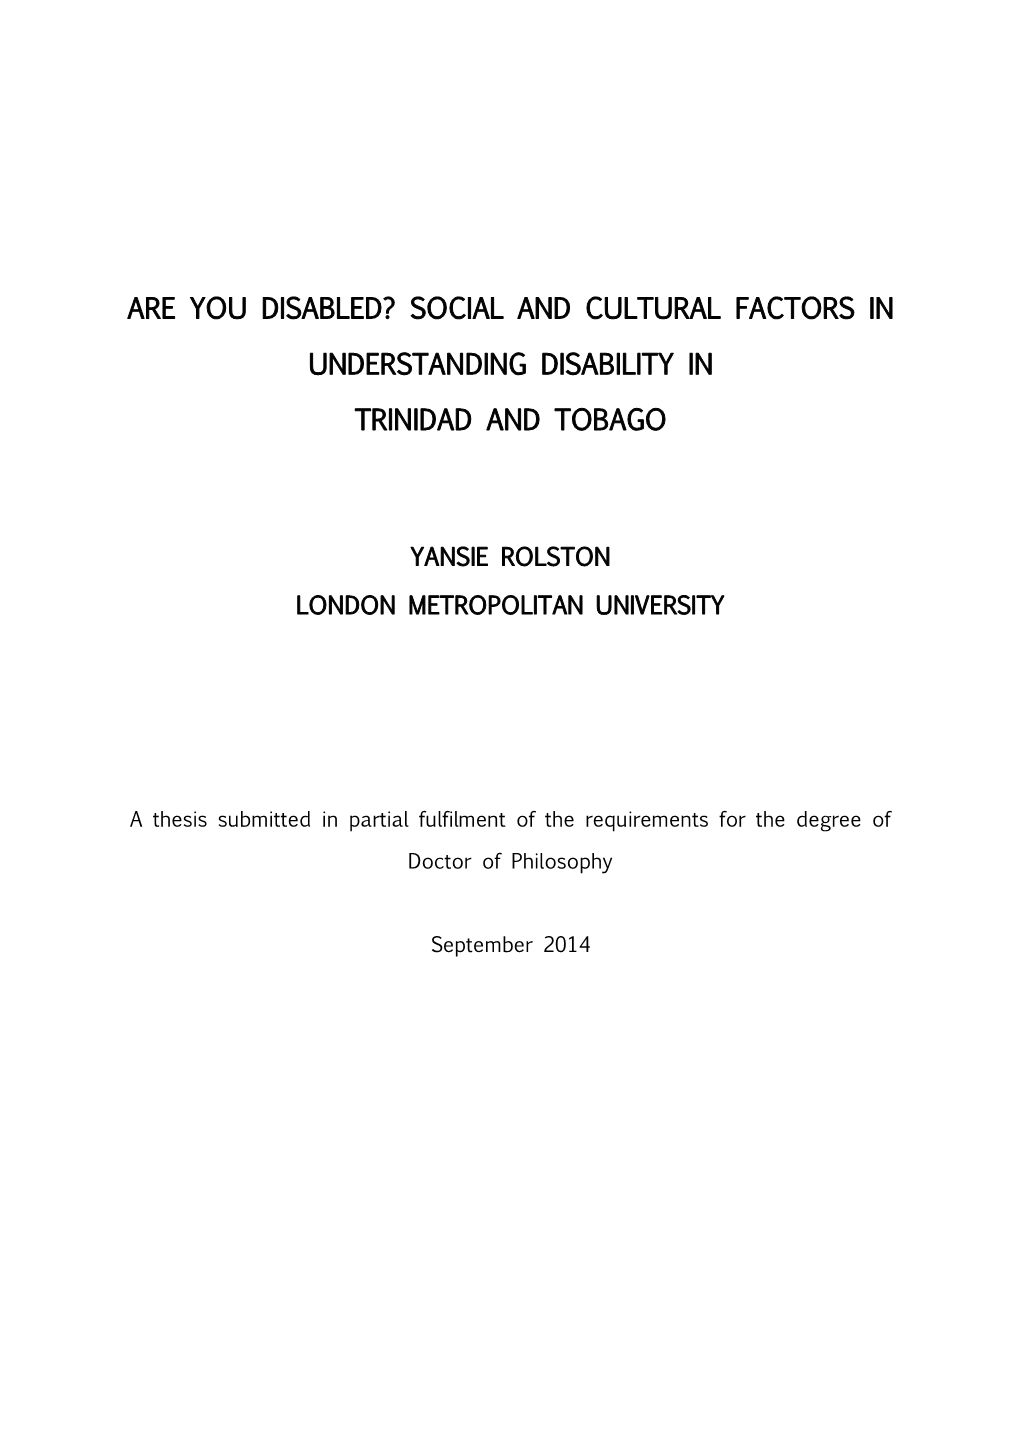 Social and Cultural Factors in Understanding Disability in Trinidad and Tobago